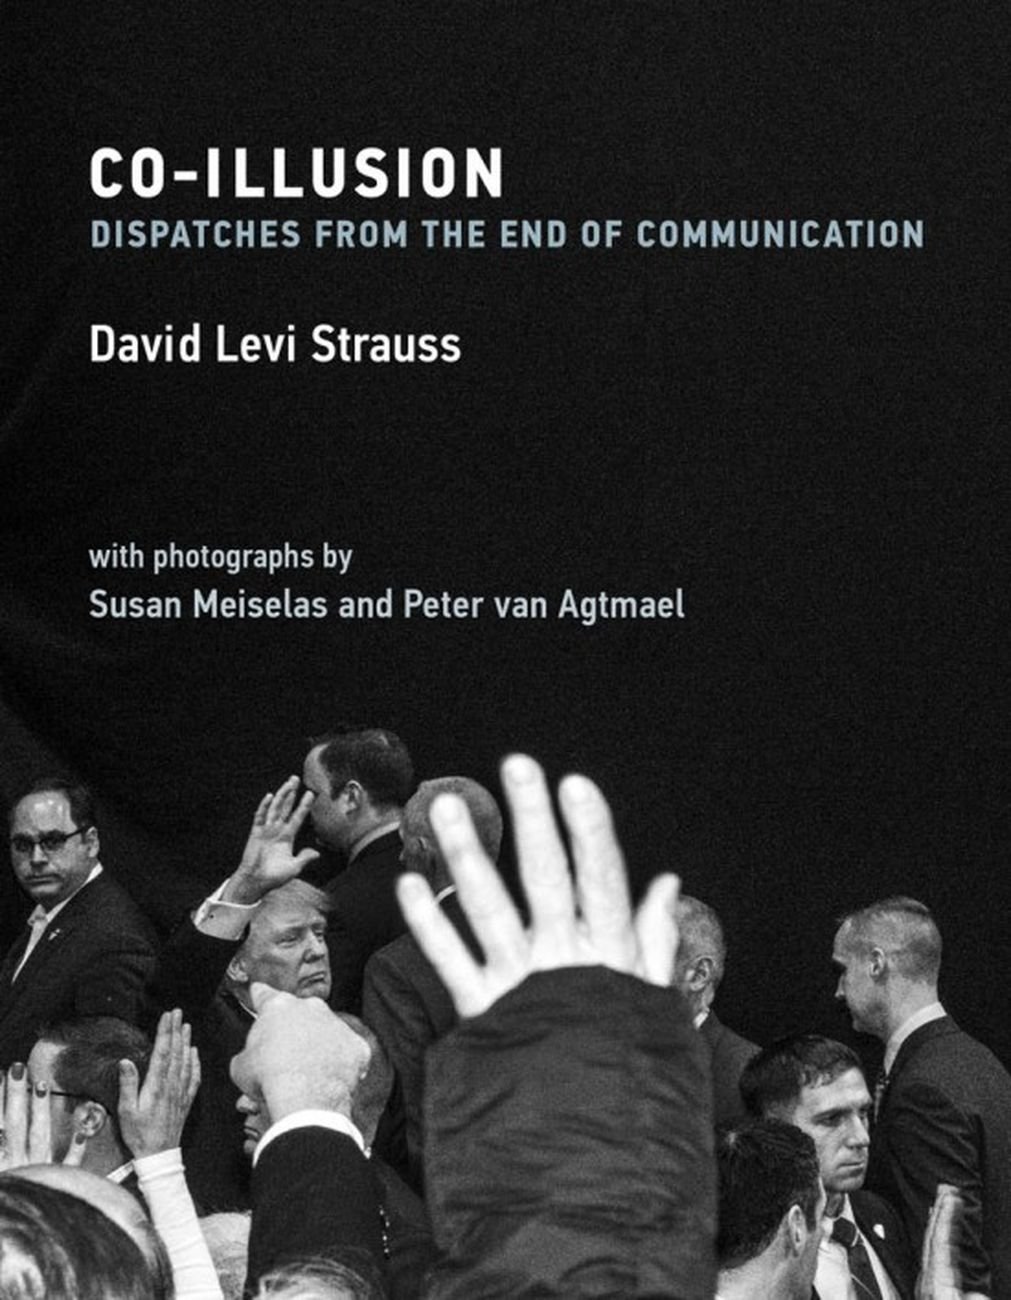 David Levi Strauss ‒ Co Illusion. Dispatches from the End of Communication (The MIT Press, Cambridge (Mass.) 2020)